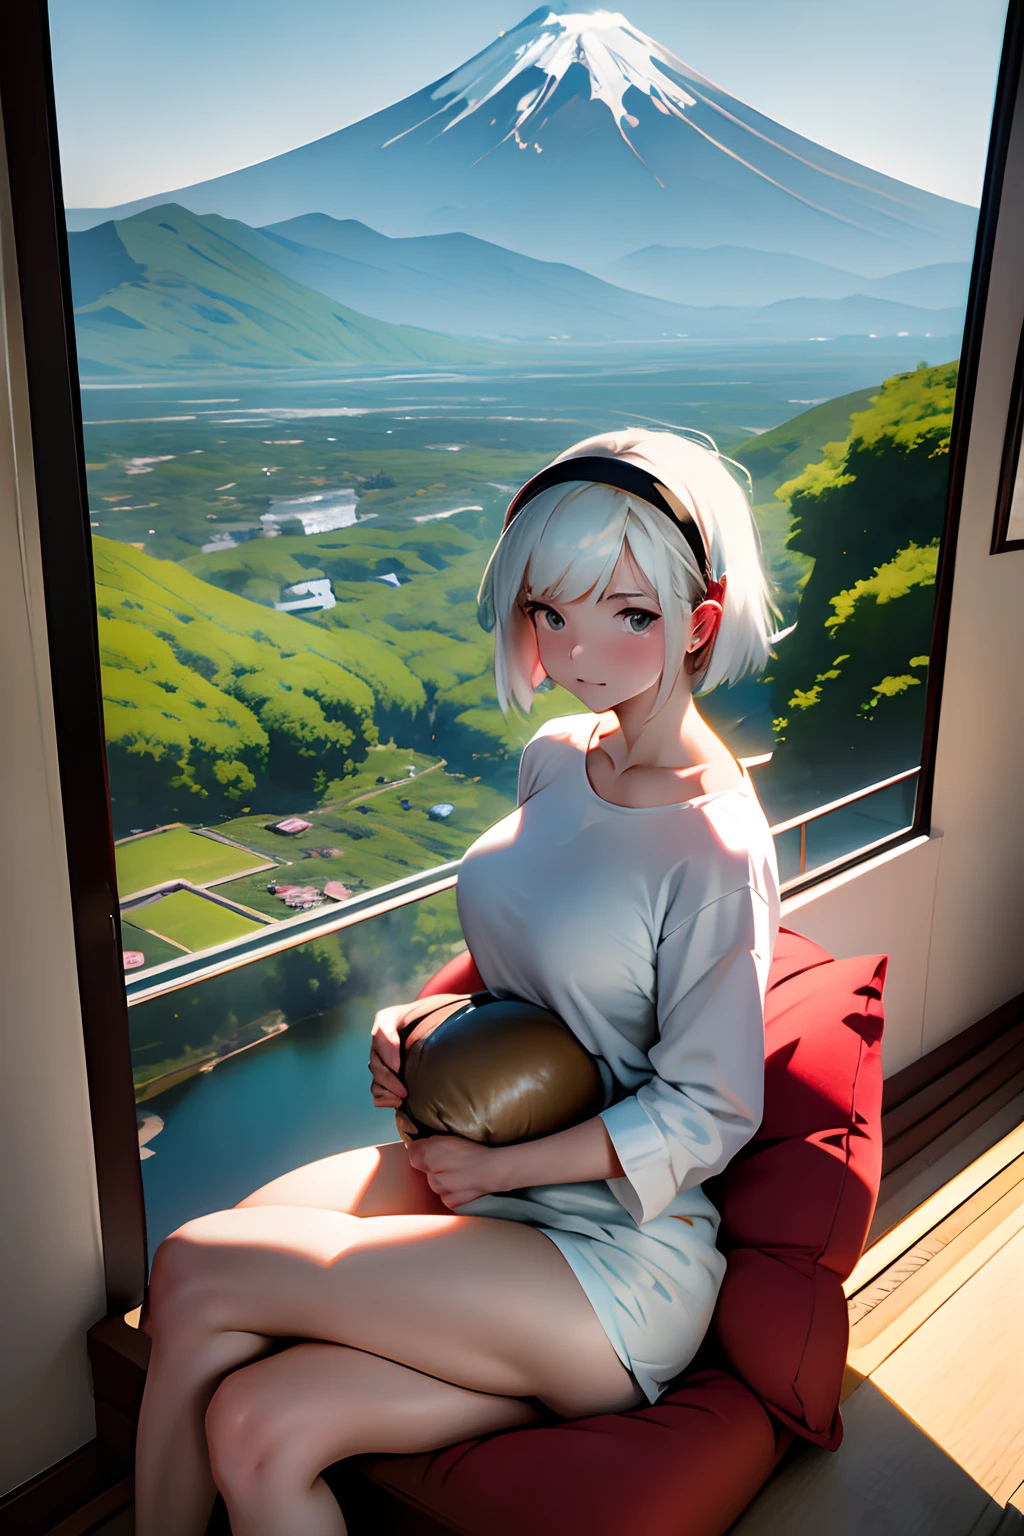 Rabbit eared headband,solo,girl with,Shortcut Hair,Red stamp,White Total Neck Shirt,Sitting on a beaded cushion,Eggplant-colored beaded cushion、White neck,huge window,I can see the mountains. mt. Fuji seen from the train window,mountain fuji on the background:1.5,Steller's sea eagle in flight:1.3,Looks cold,yuki,